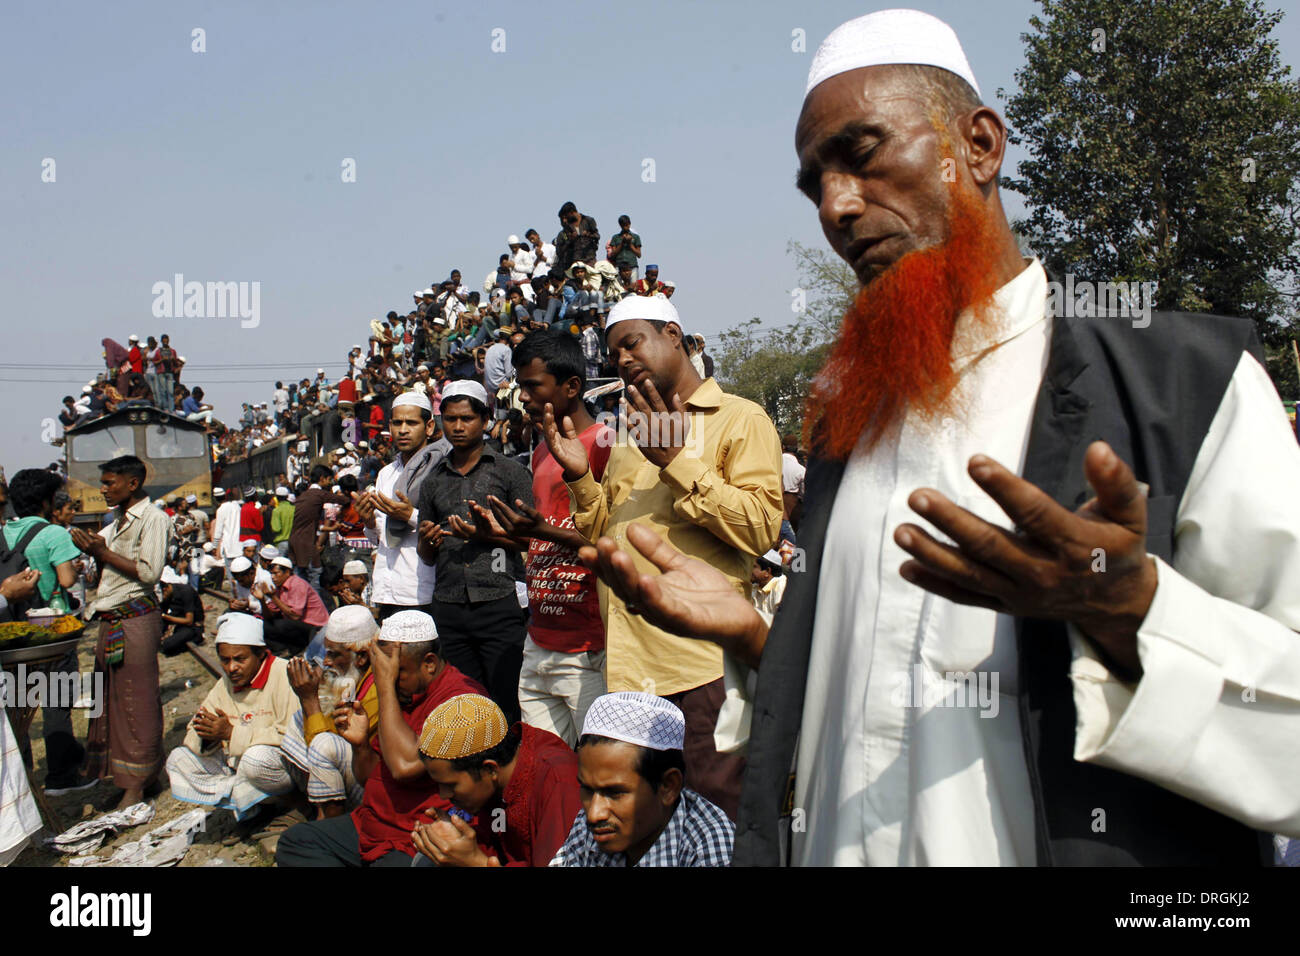 Dhaka,Bangladeshi Muslim devotees attend the Akheri Munajat concluding prayers on the third day of Biswa Ijtema, the second largest Muslim congregation after the Hajj, at Tongi with more than two million Muslims from Bangladesh and abroad. The Biswa Ijtema, the world’s second largest religious gathering of Muslims concluded with the prayer of Akheri Munajat on the bank of river Turag. The event focuses on prayers and meditation and does not allow political discussion.  Thousands of Muslims joined the prayer at the Biswa Ijtema grounds and surrounding areas. Stock Photo